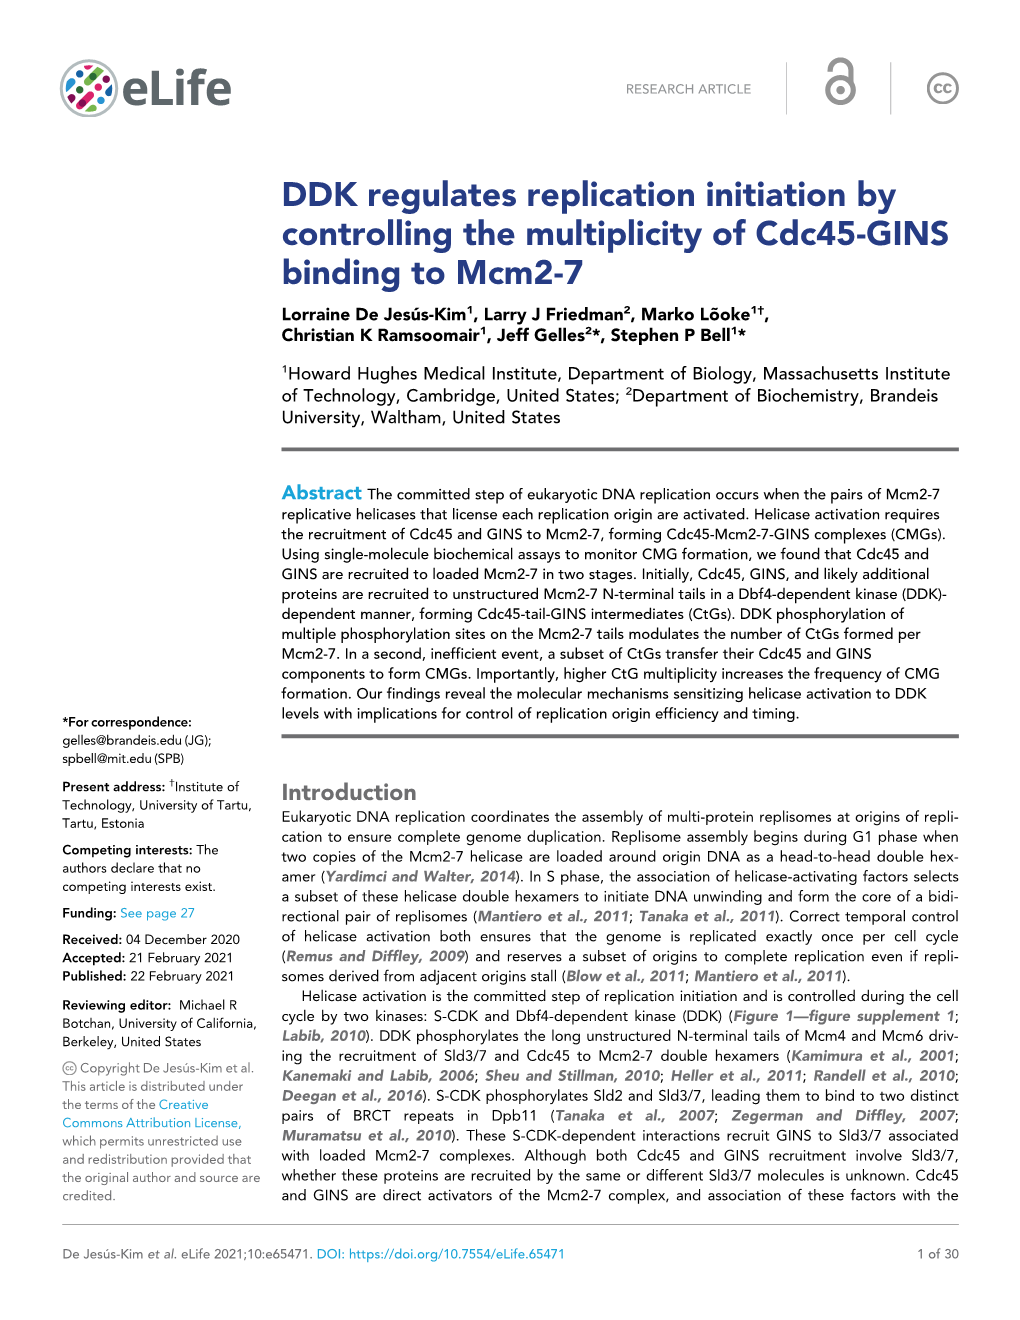 DDK Regulates Replication Initiation by Controlling the Multiplicity of Cdc45-GINS Binding to Mcm2-7